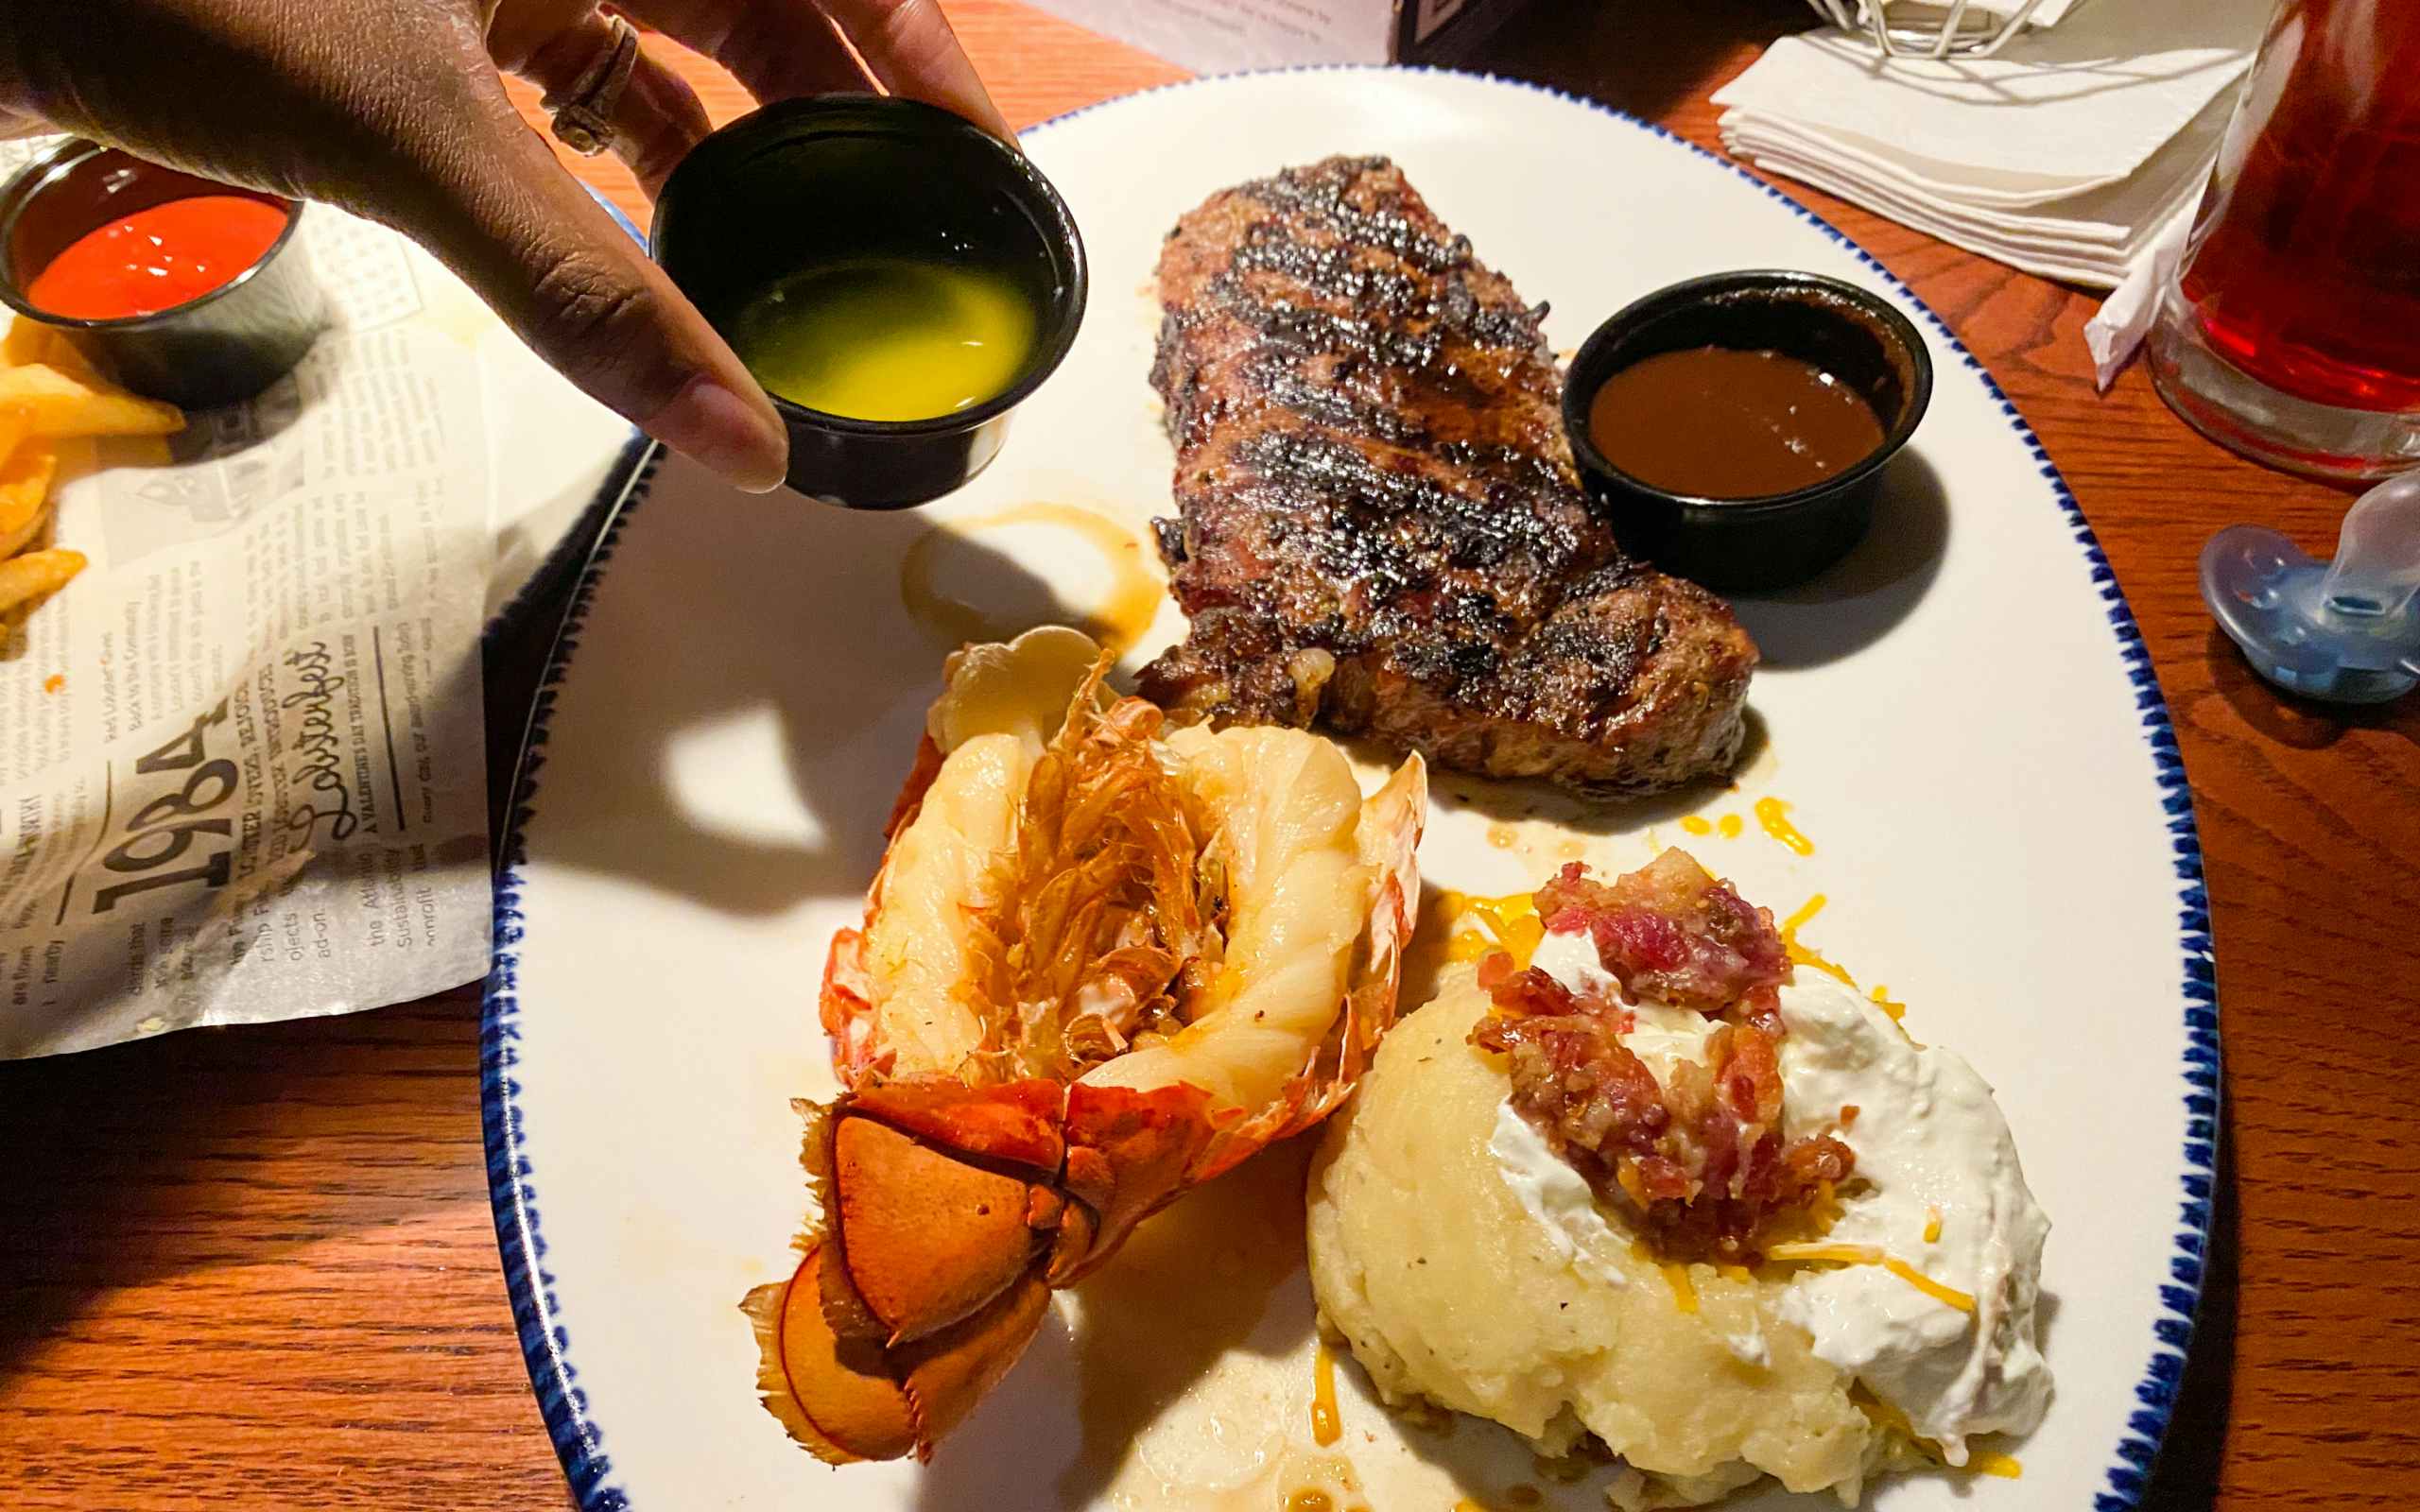 steak and lobster meal on the table at a red lobster restaurant